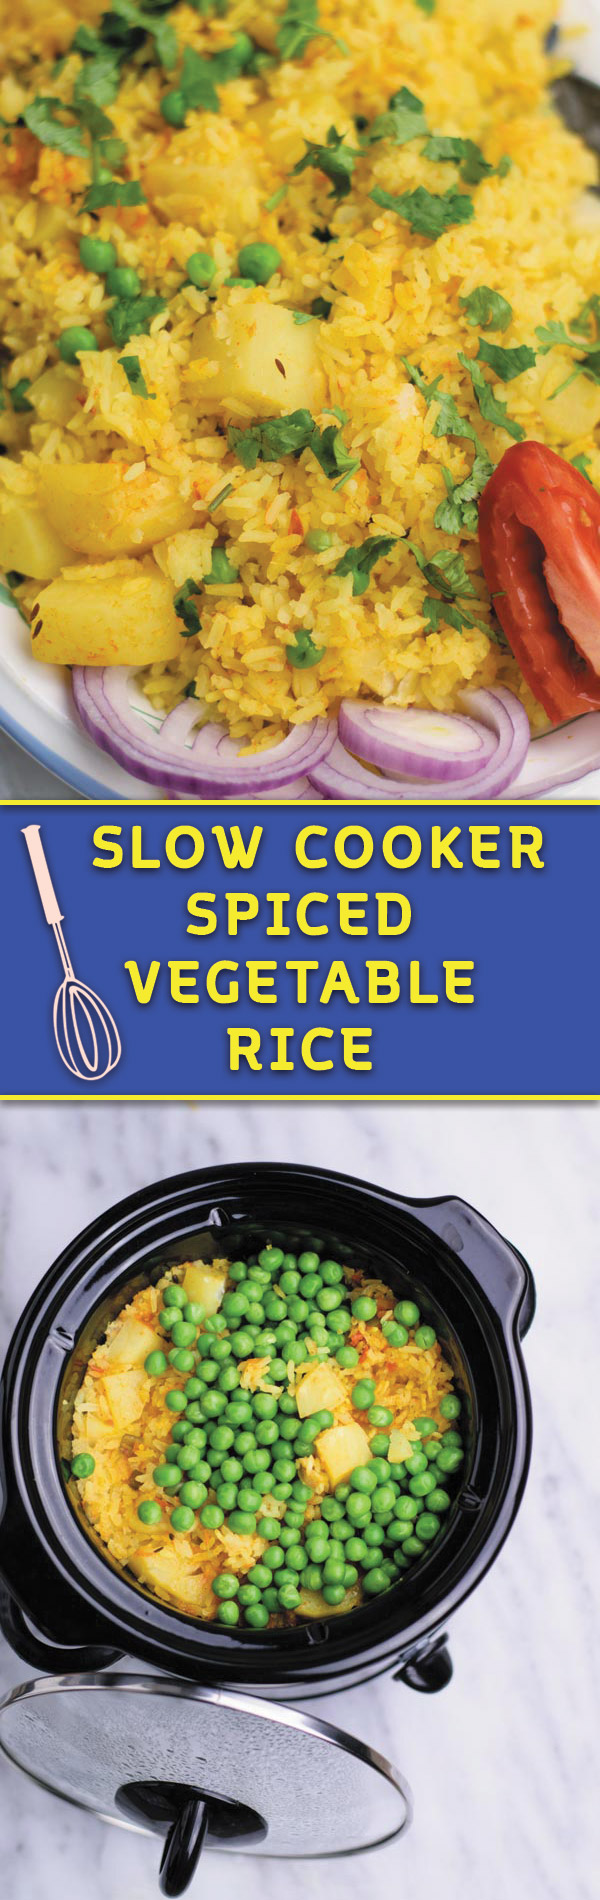 slow cooker spiced vegetable rice - delicious eaten plain or served as a side, this one pot meal comes together in slow cooker! Spiced rice with peas and potatoes makes for a cozy dinner!